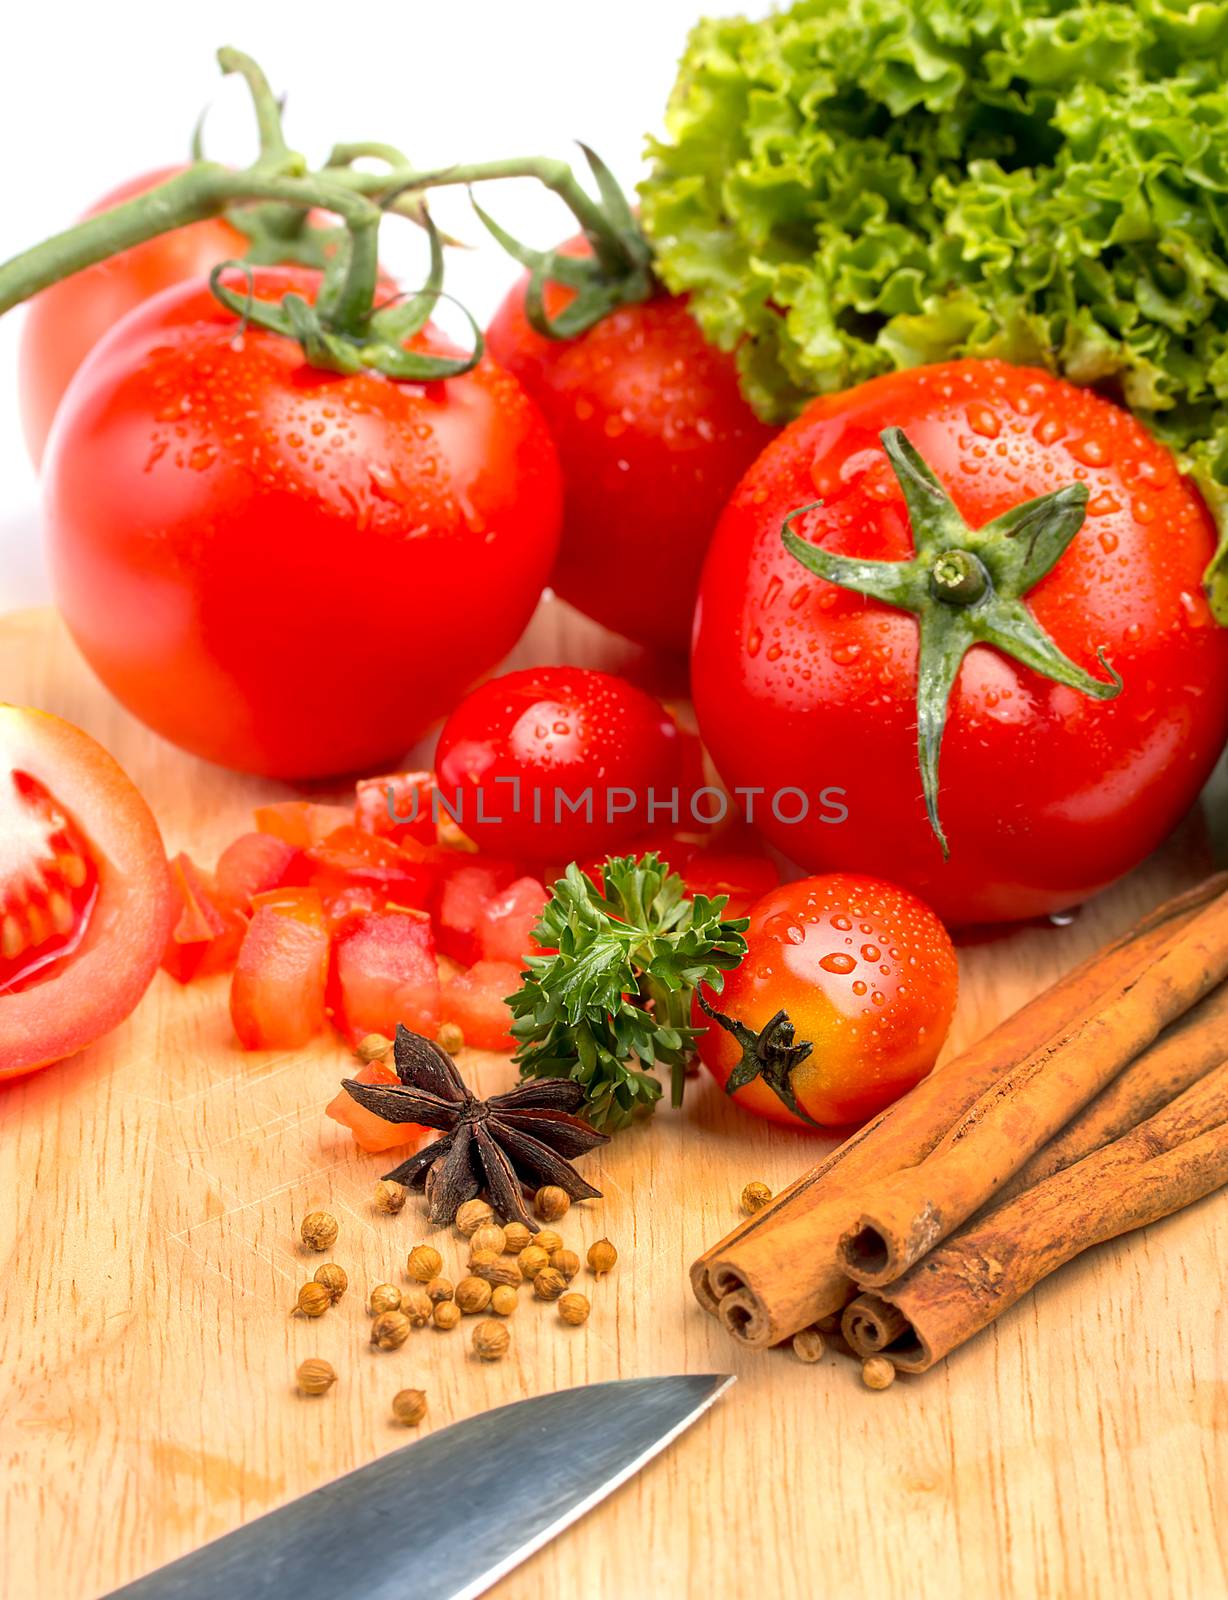 Spicy Tomatoes Showing Stick Cinnamon And Natural